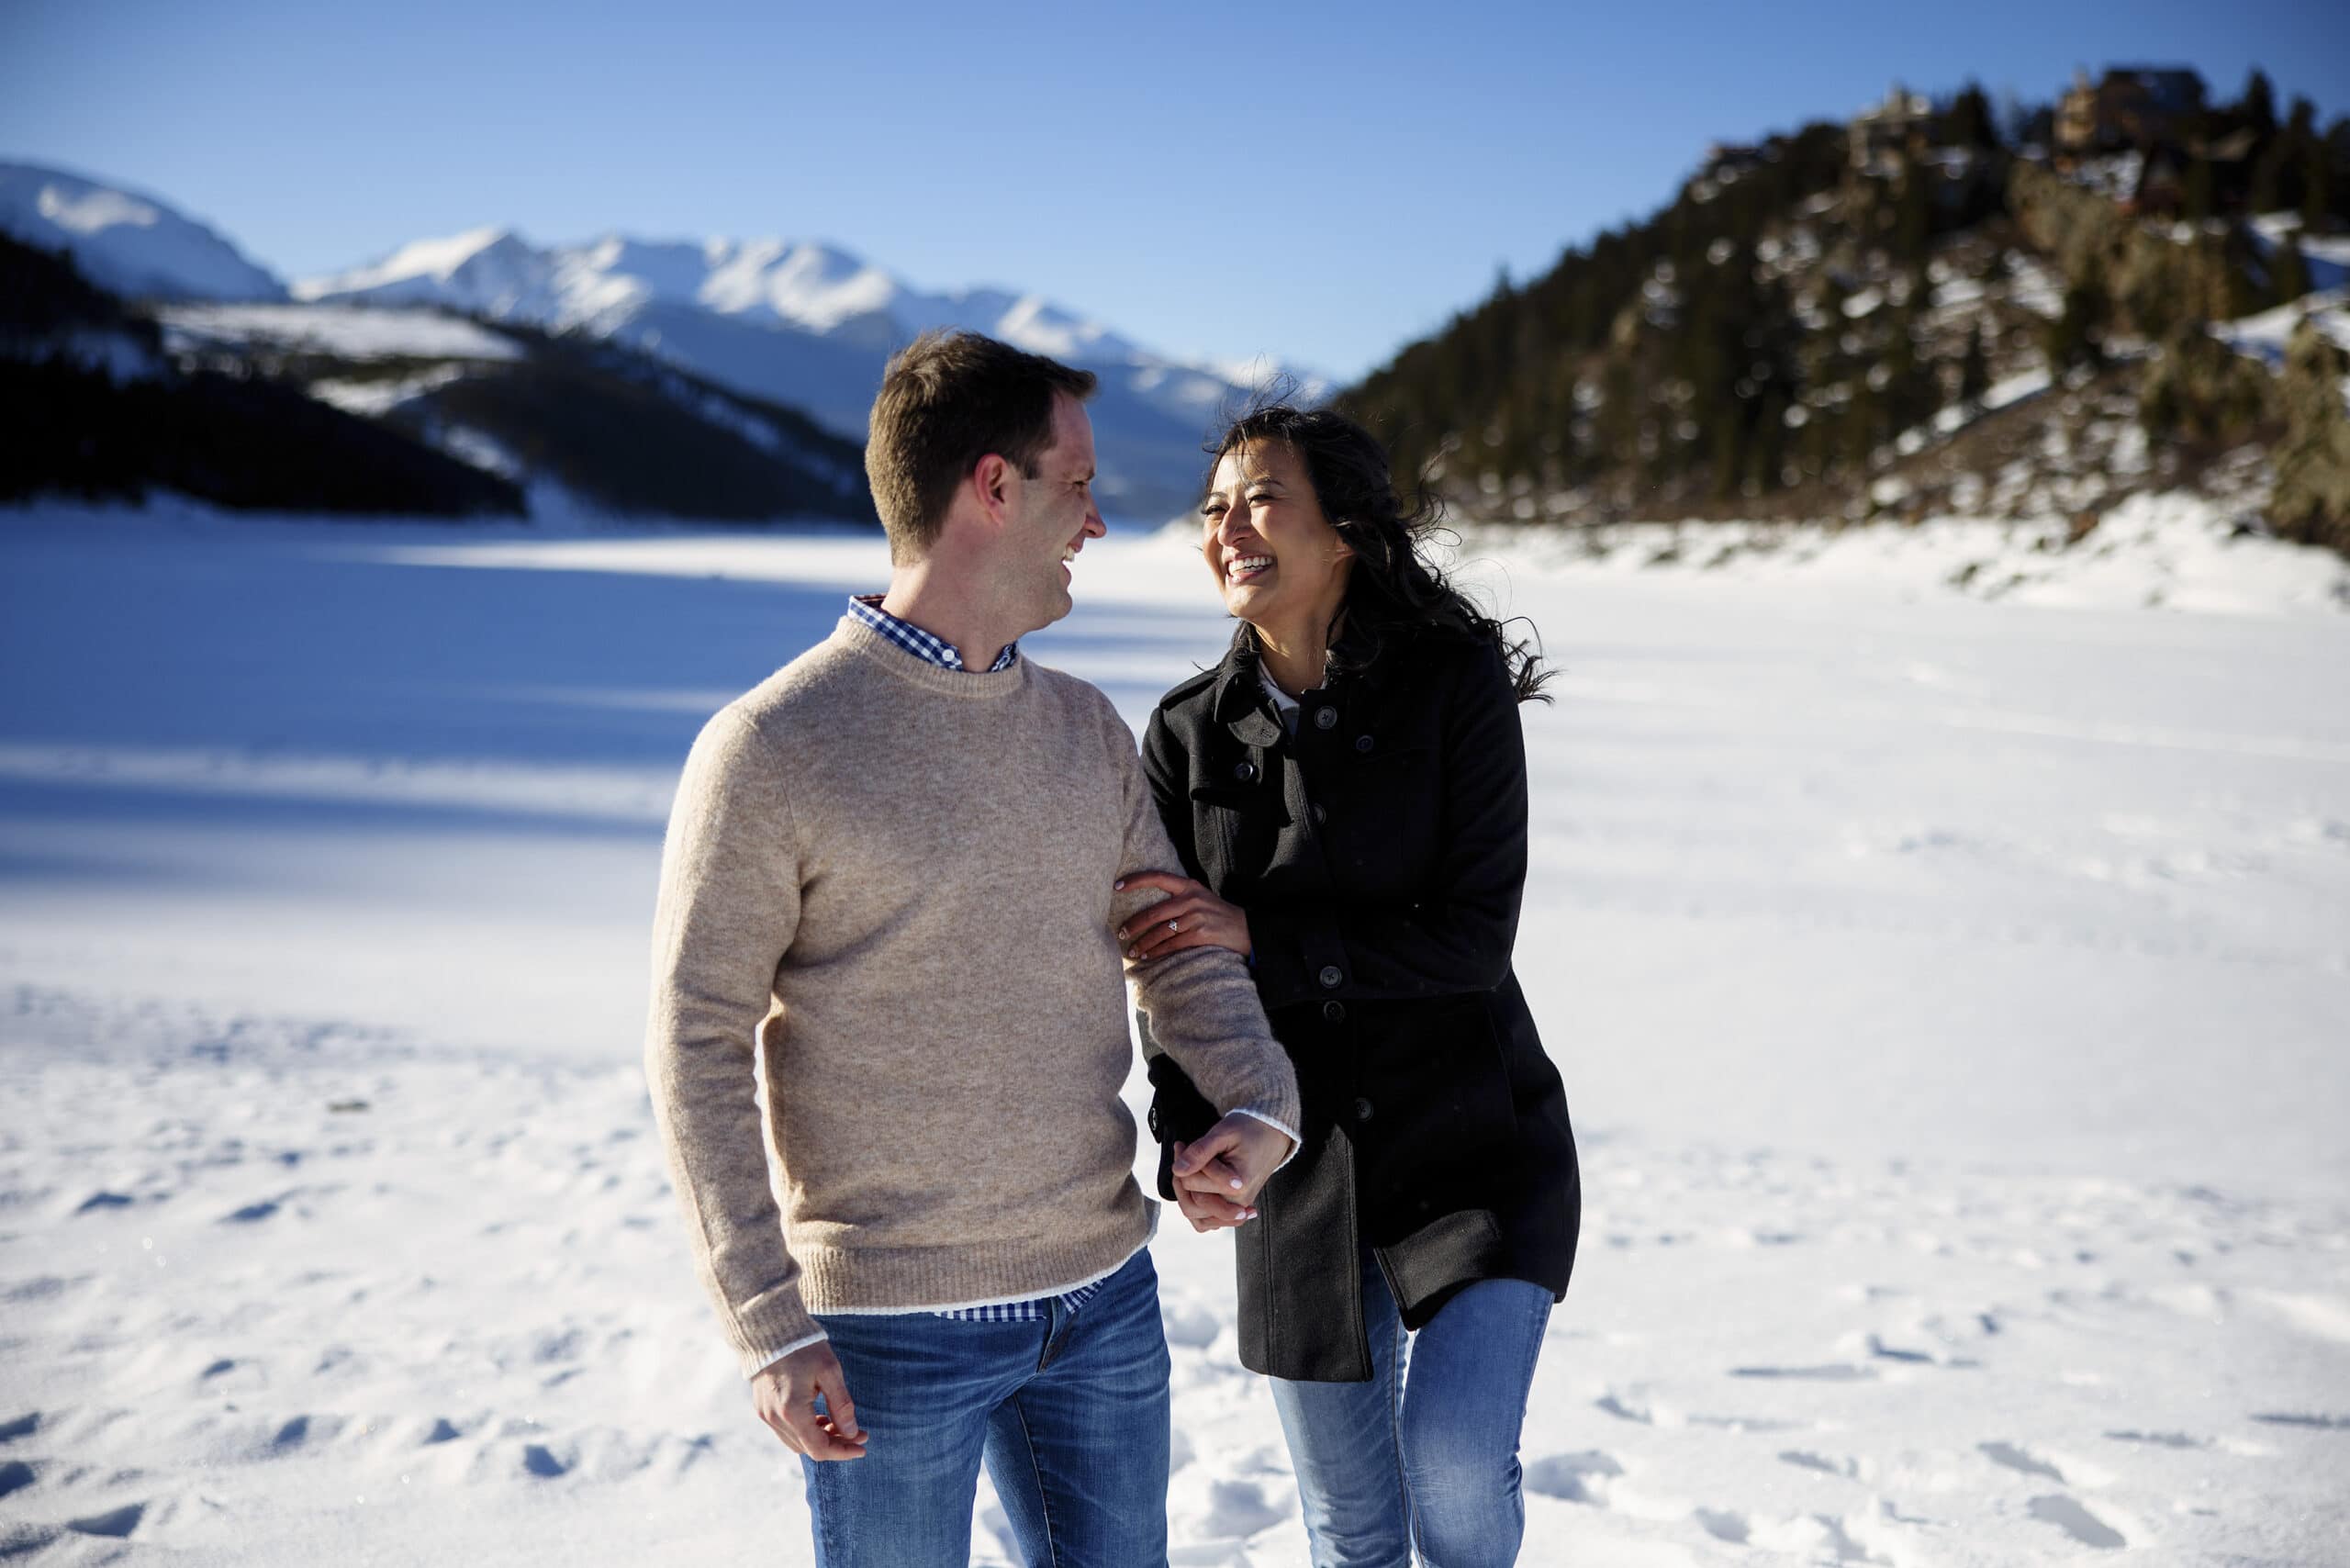 A couple shares a laugh in the snow at Dillon Reservoir